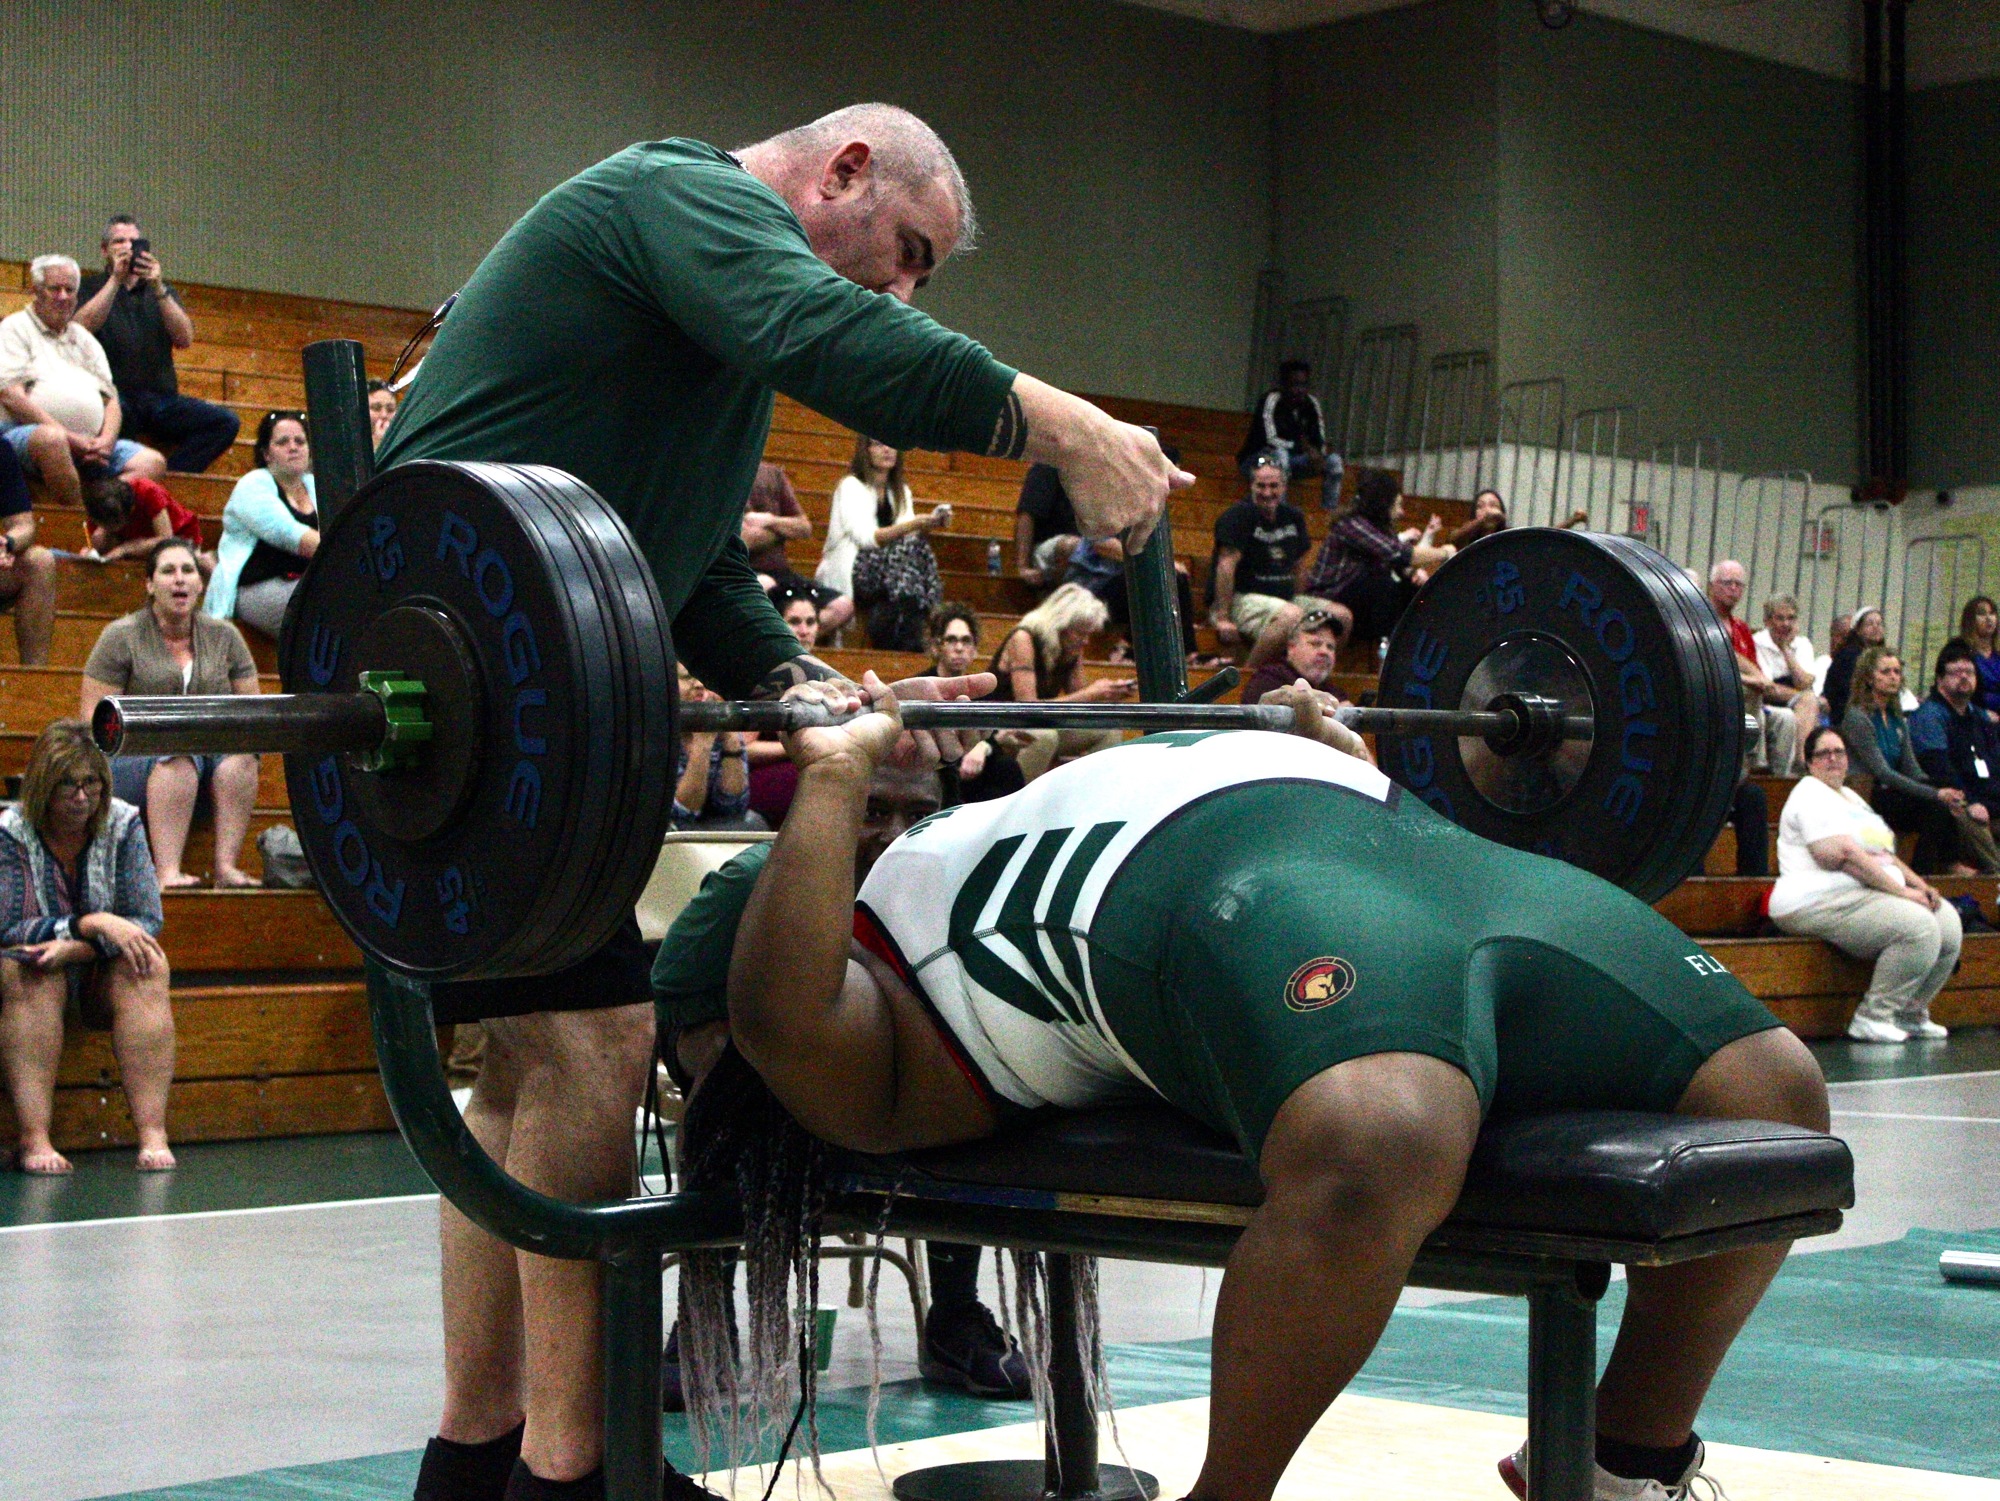 FPC coach Duane Hagstrom and lifter Lexi Buchanan during the bench press. Photo by Ray Boone